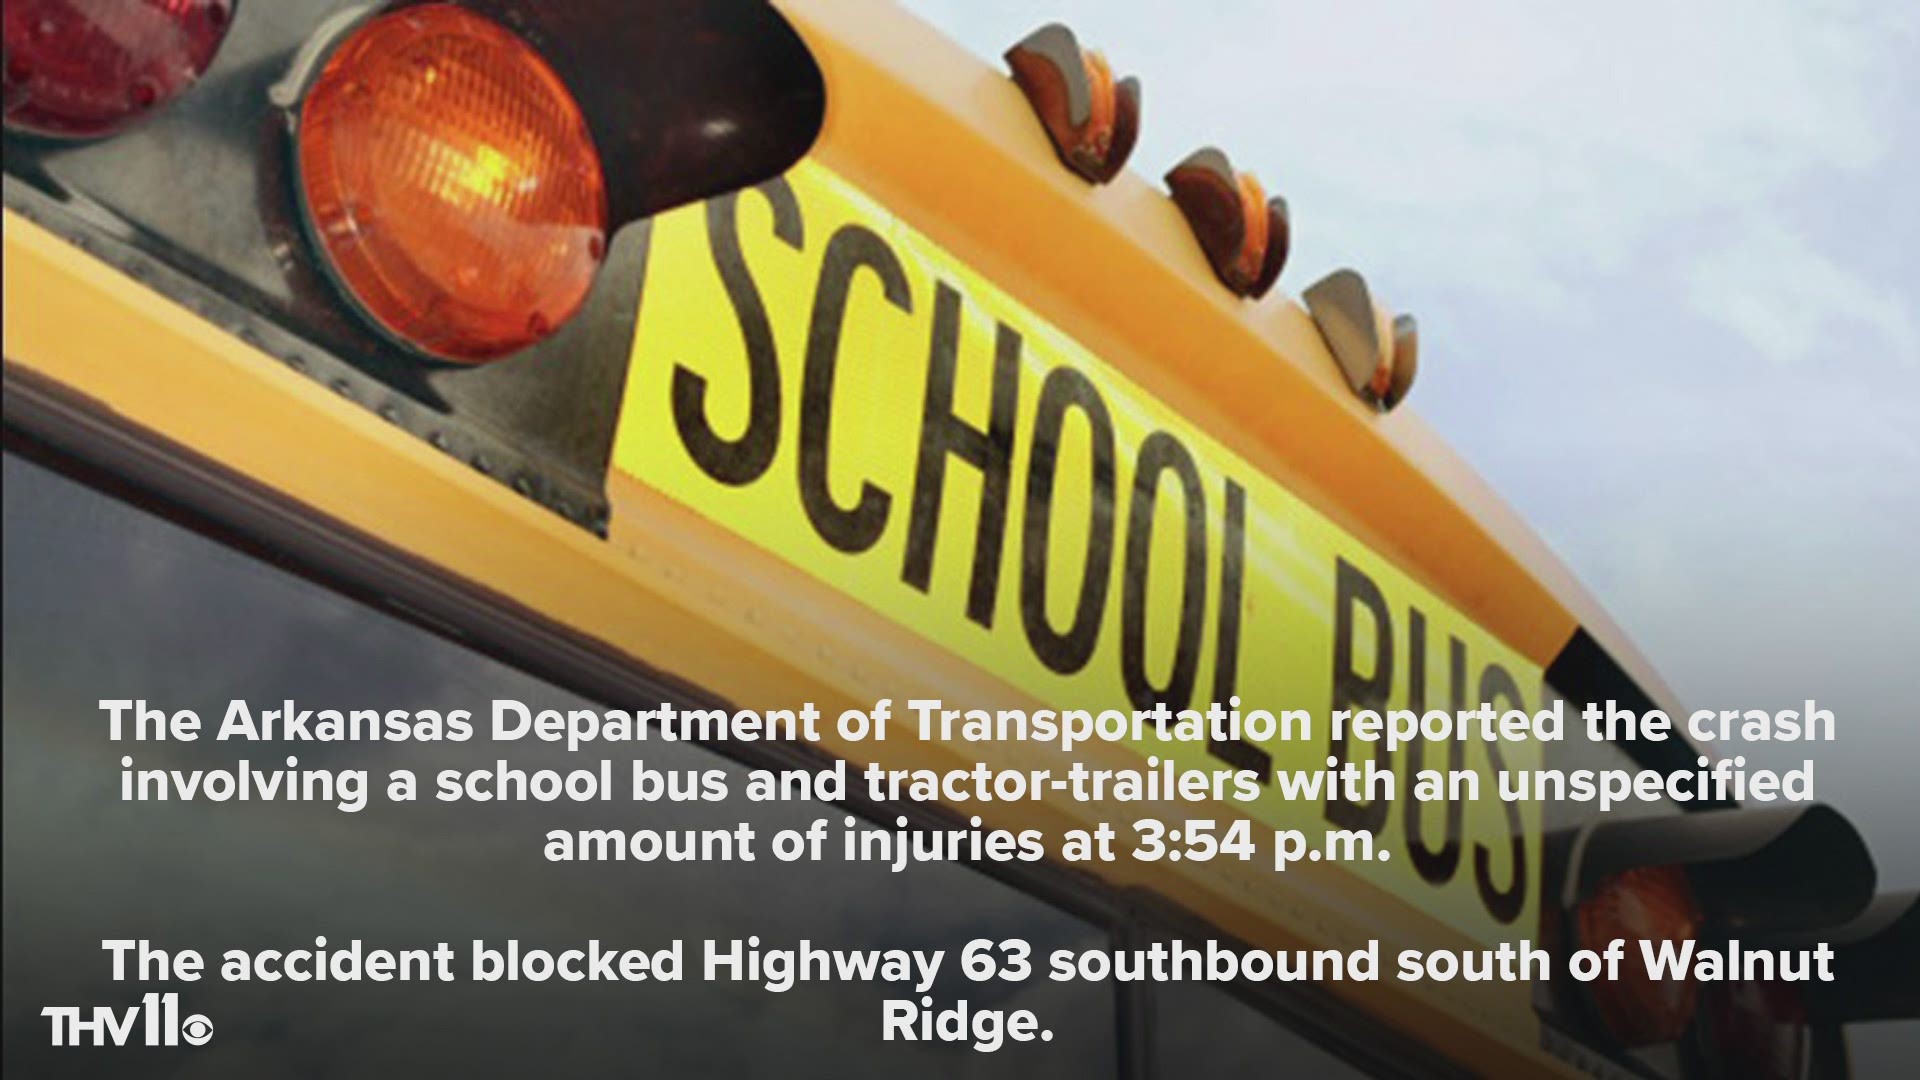 Injuries have been reported in a school bus accident according to ARDOT.